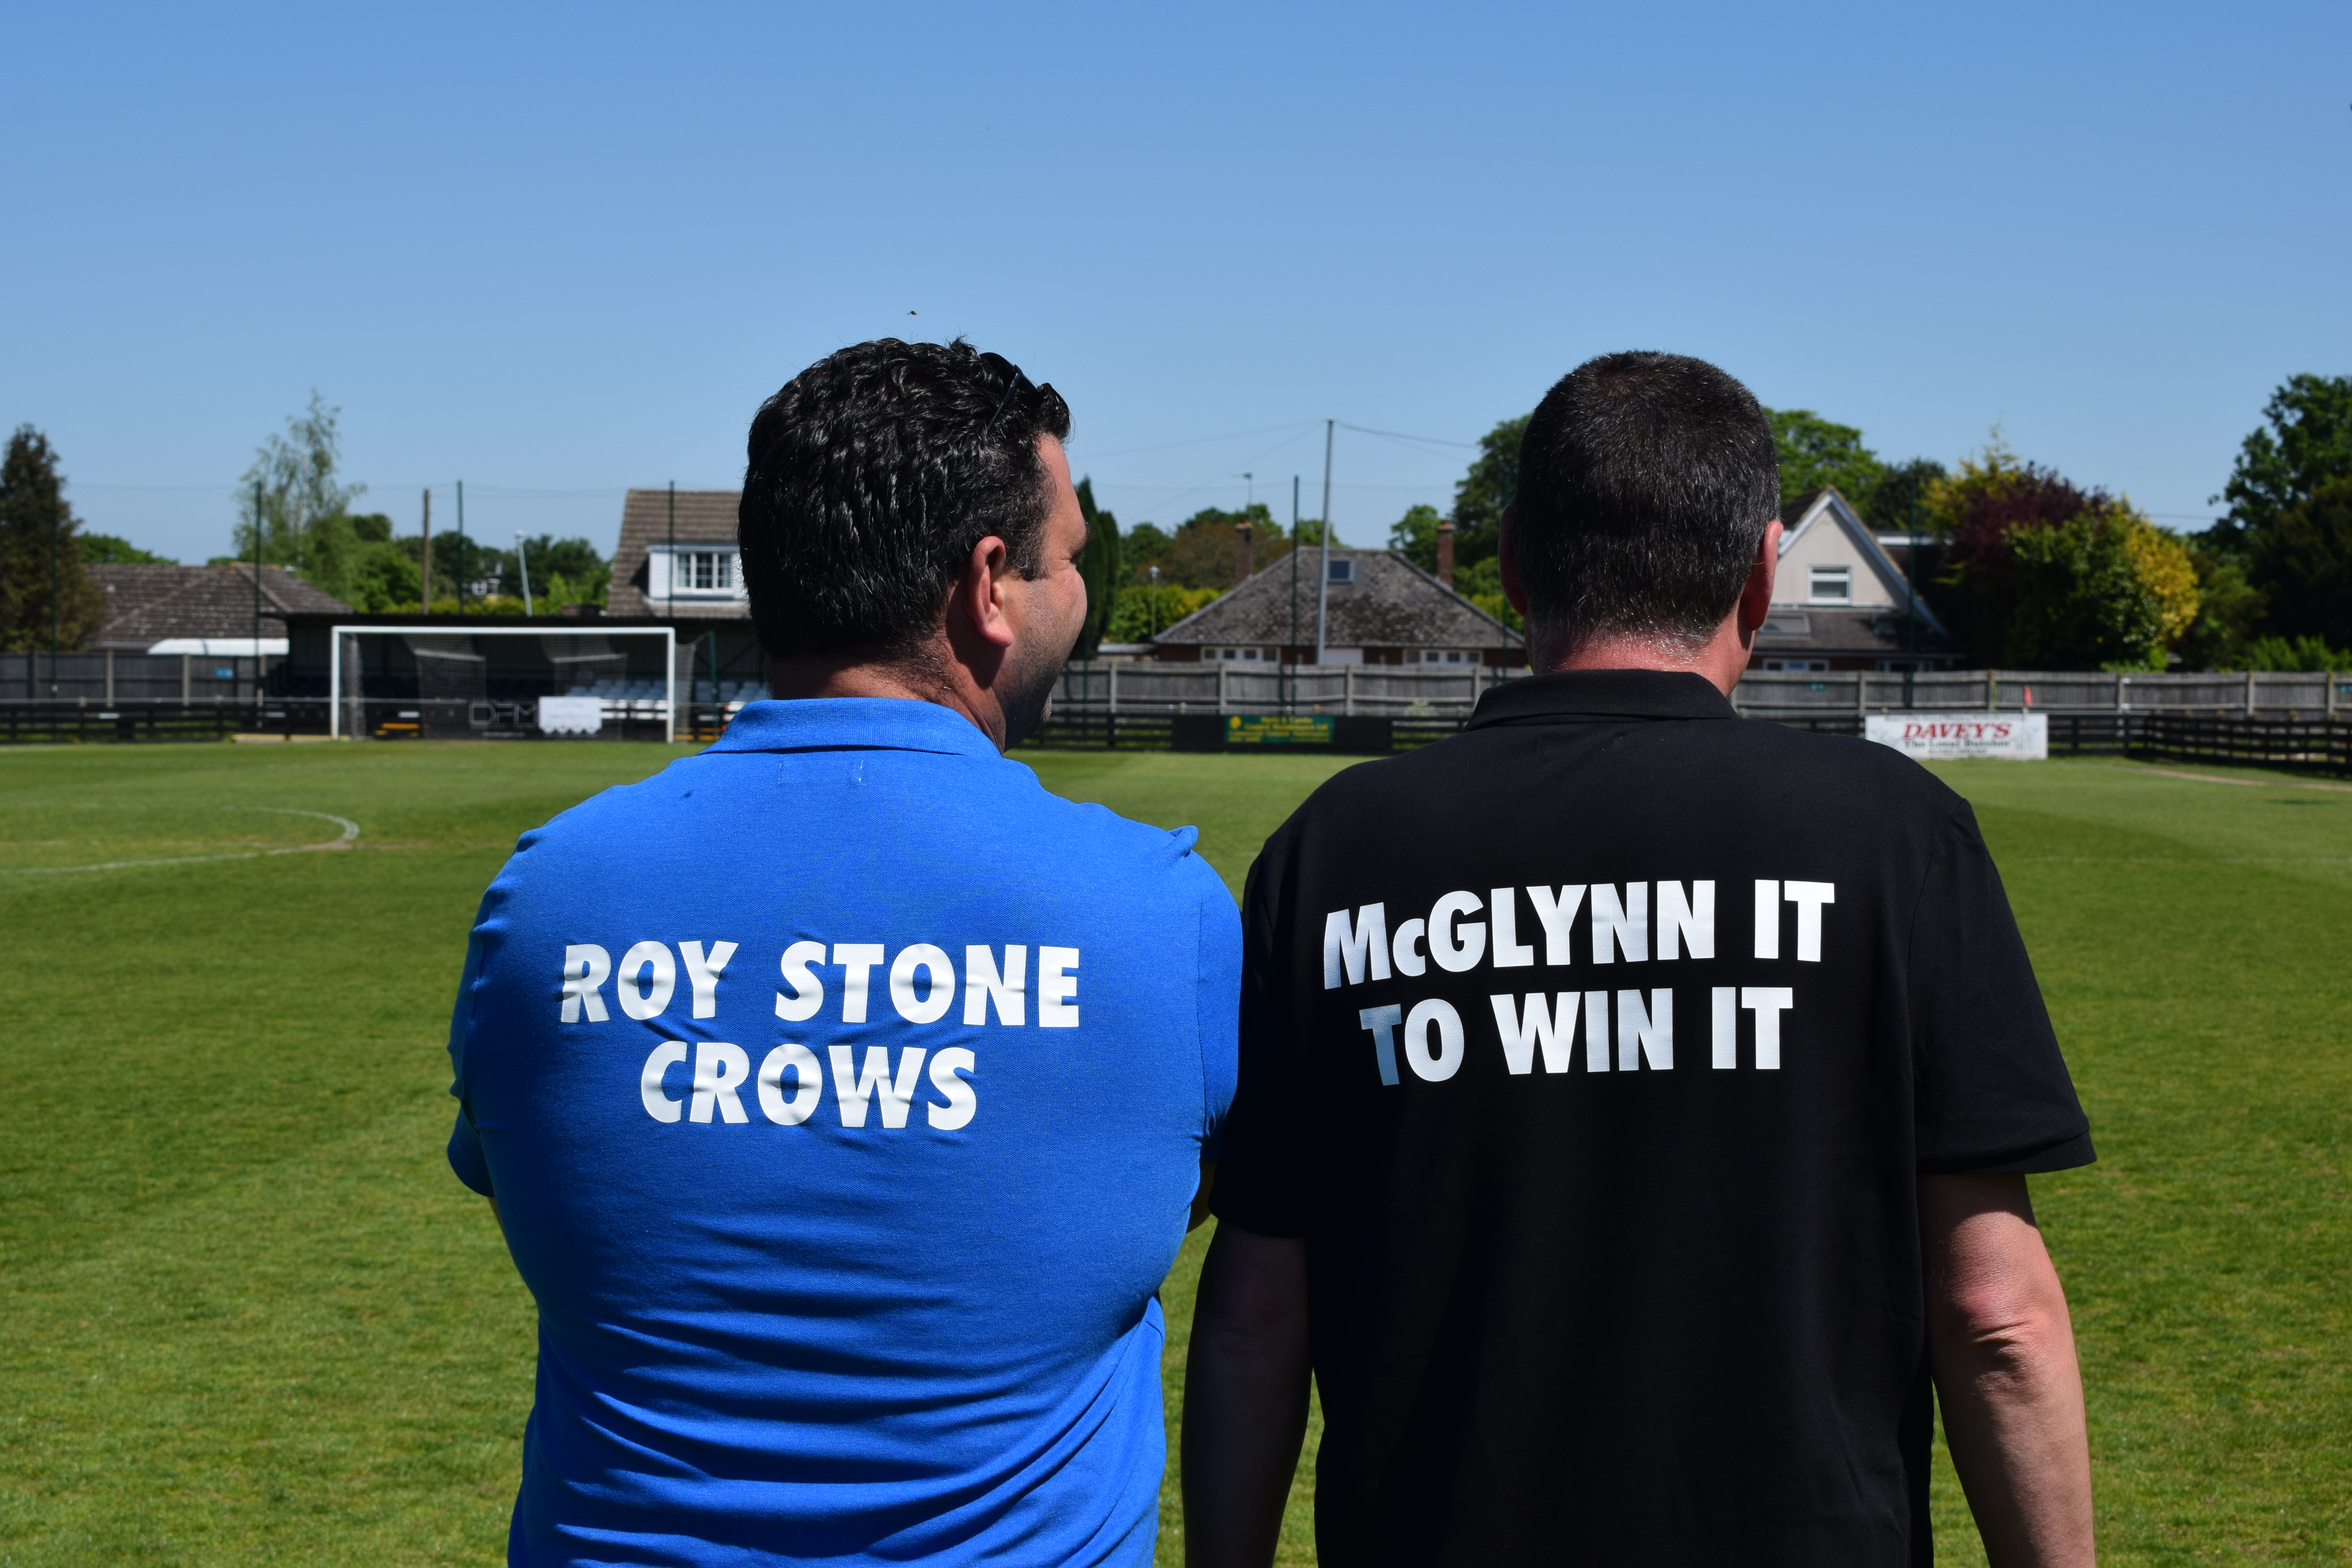 ROY STONE CROWS v McGLYNN IT TO WIN IT